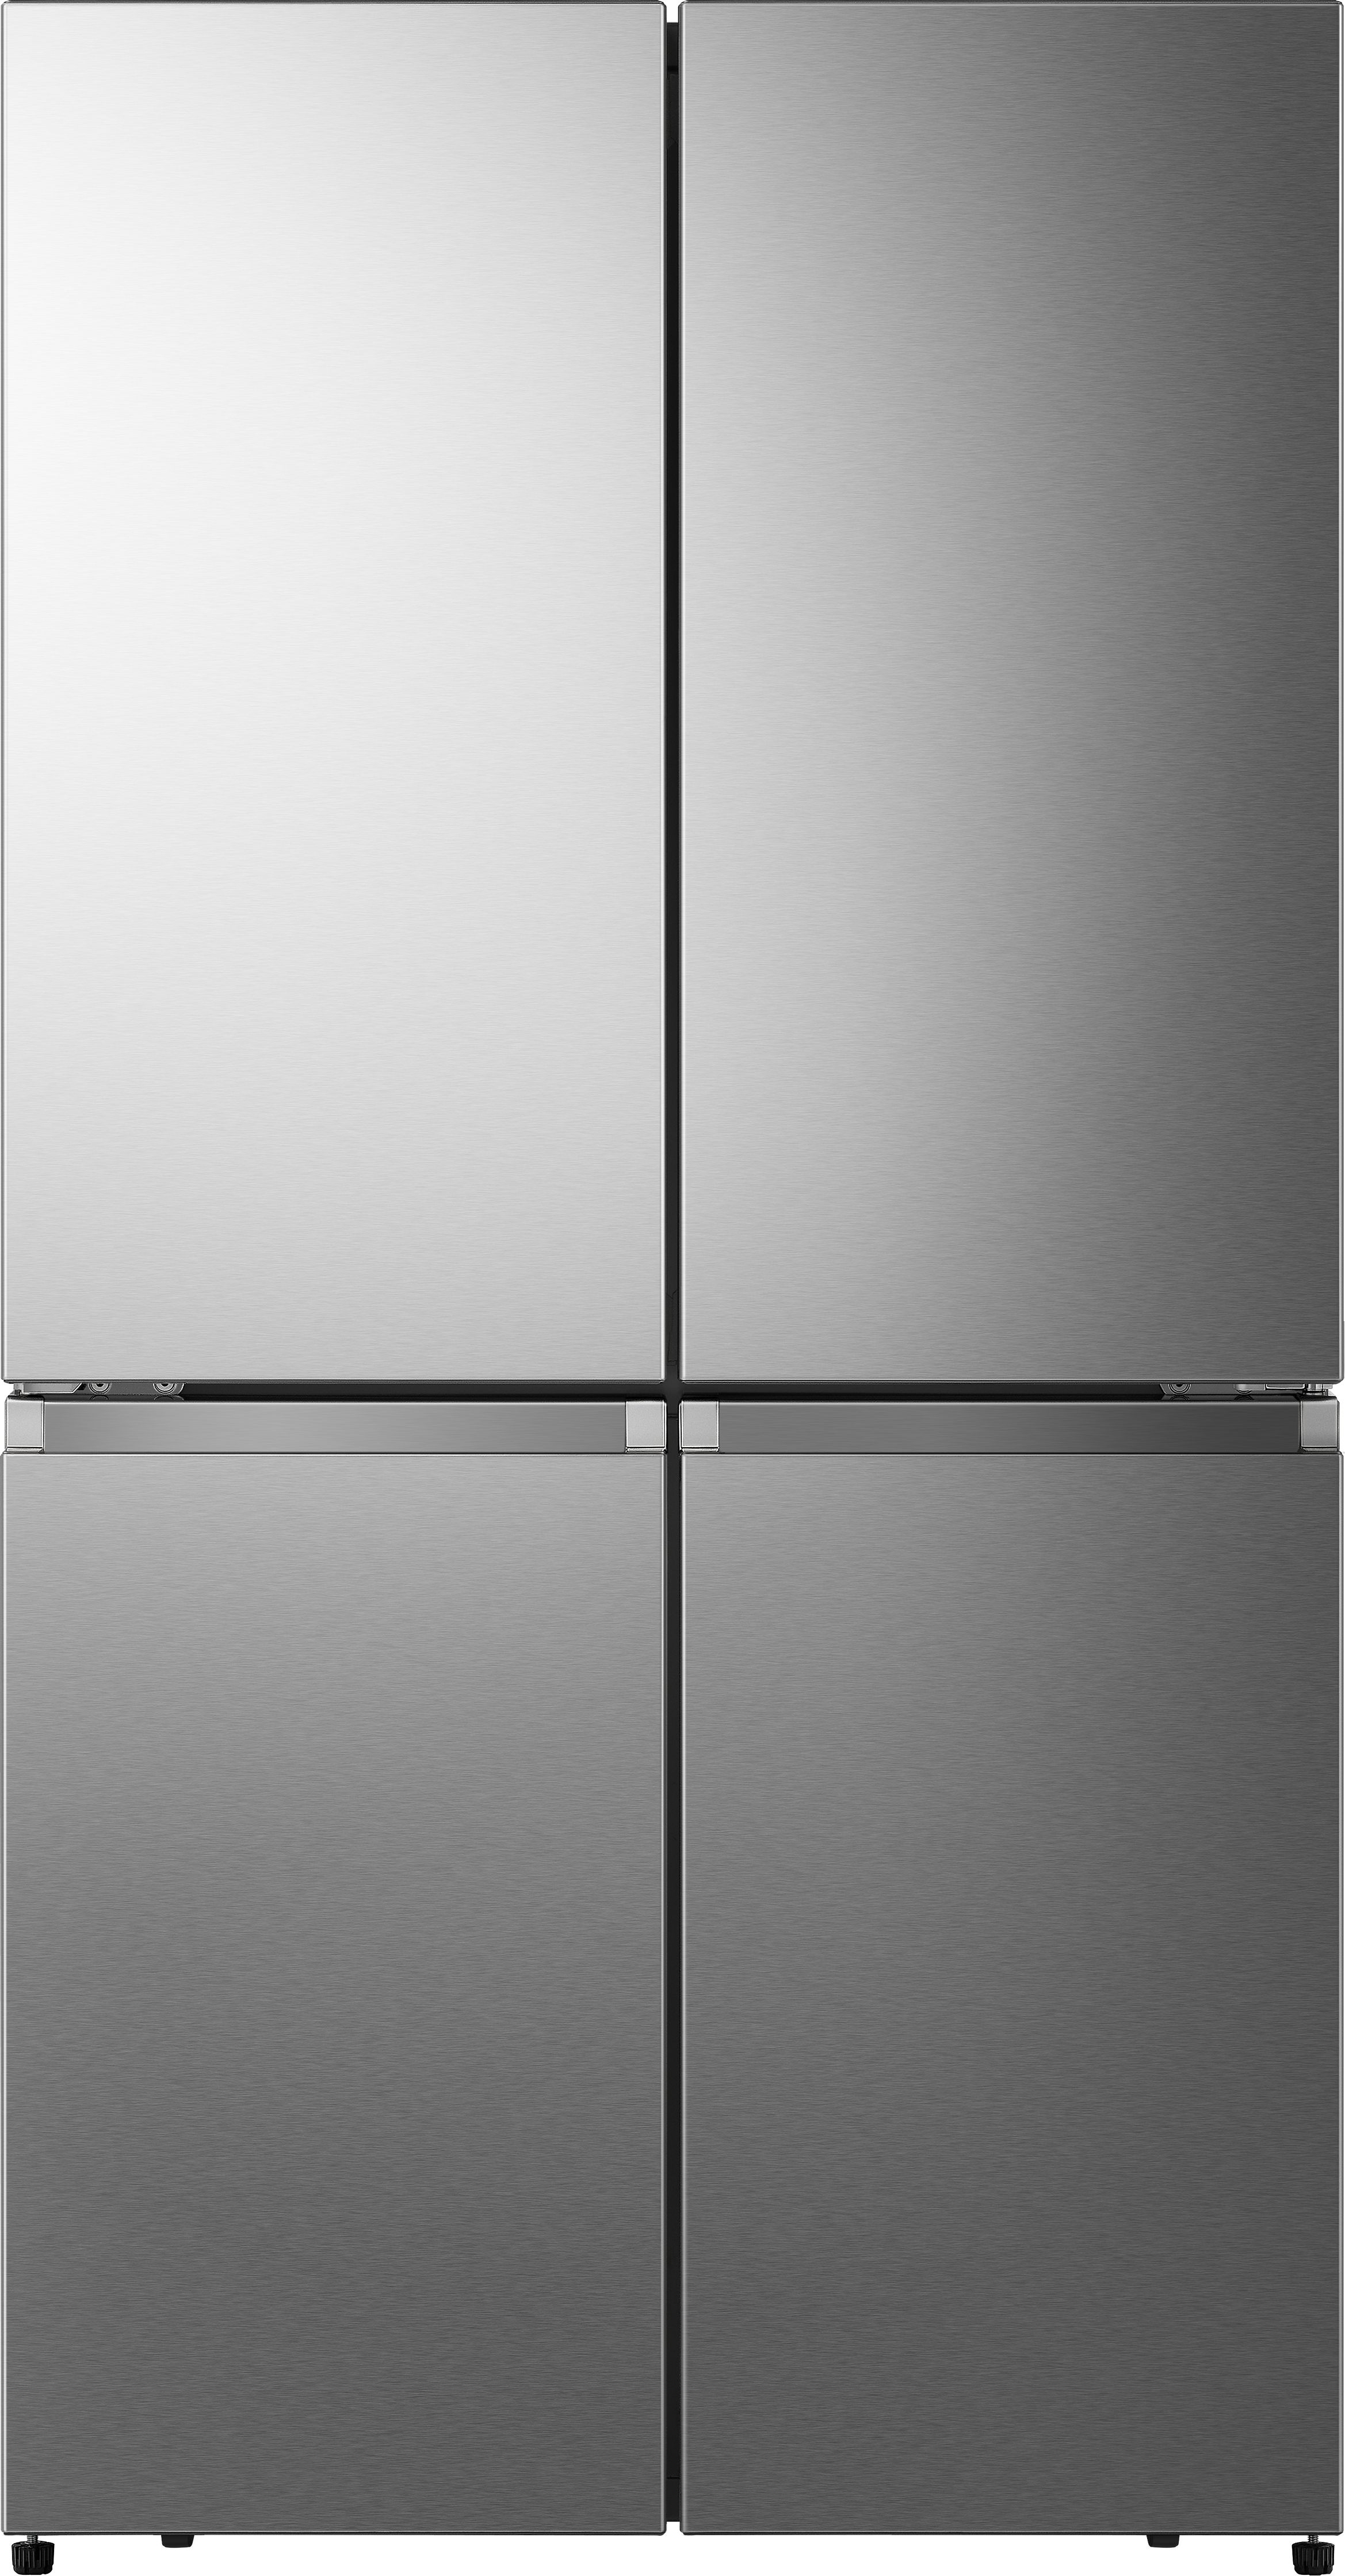 Hisense RQ758N4SASE Total No Frost American Fridge Freezer - Stainless Steel - E Rated, Stainless Steel